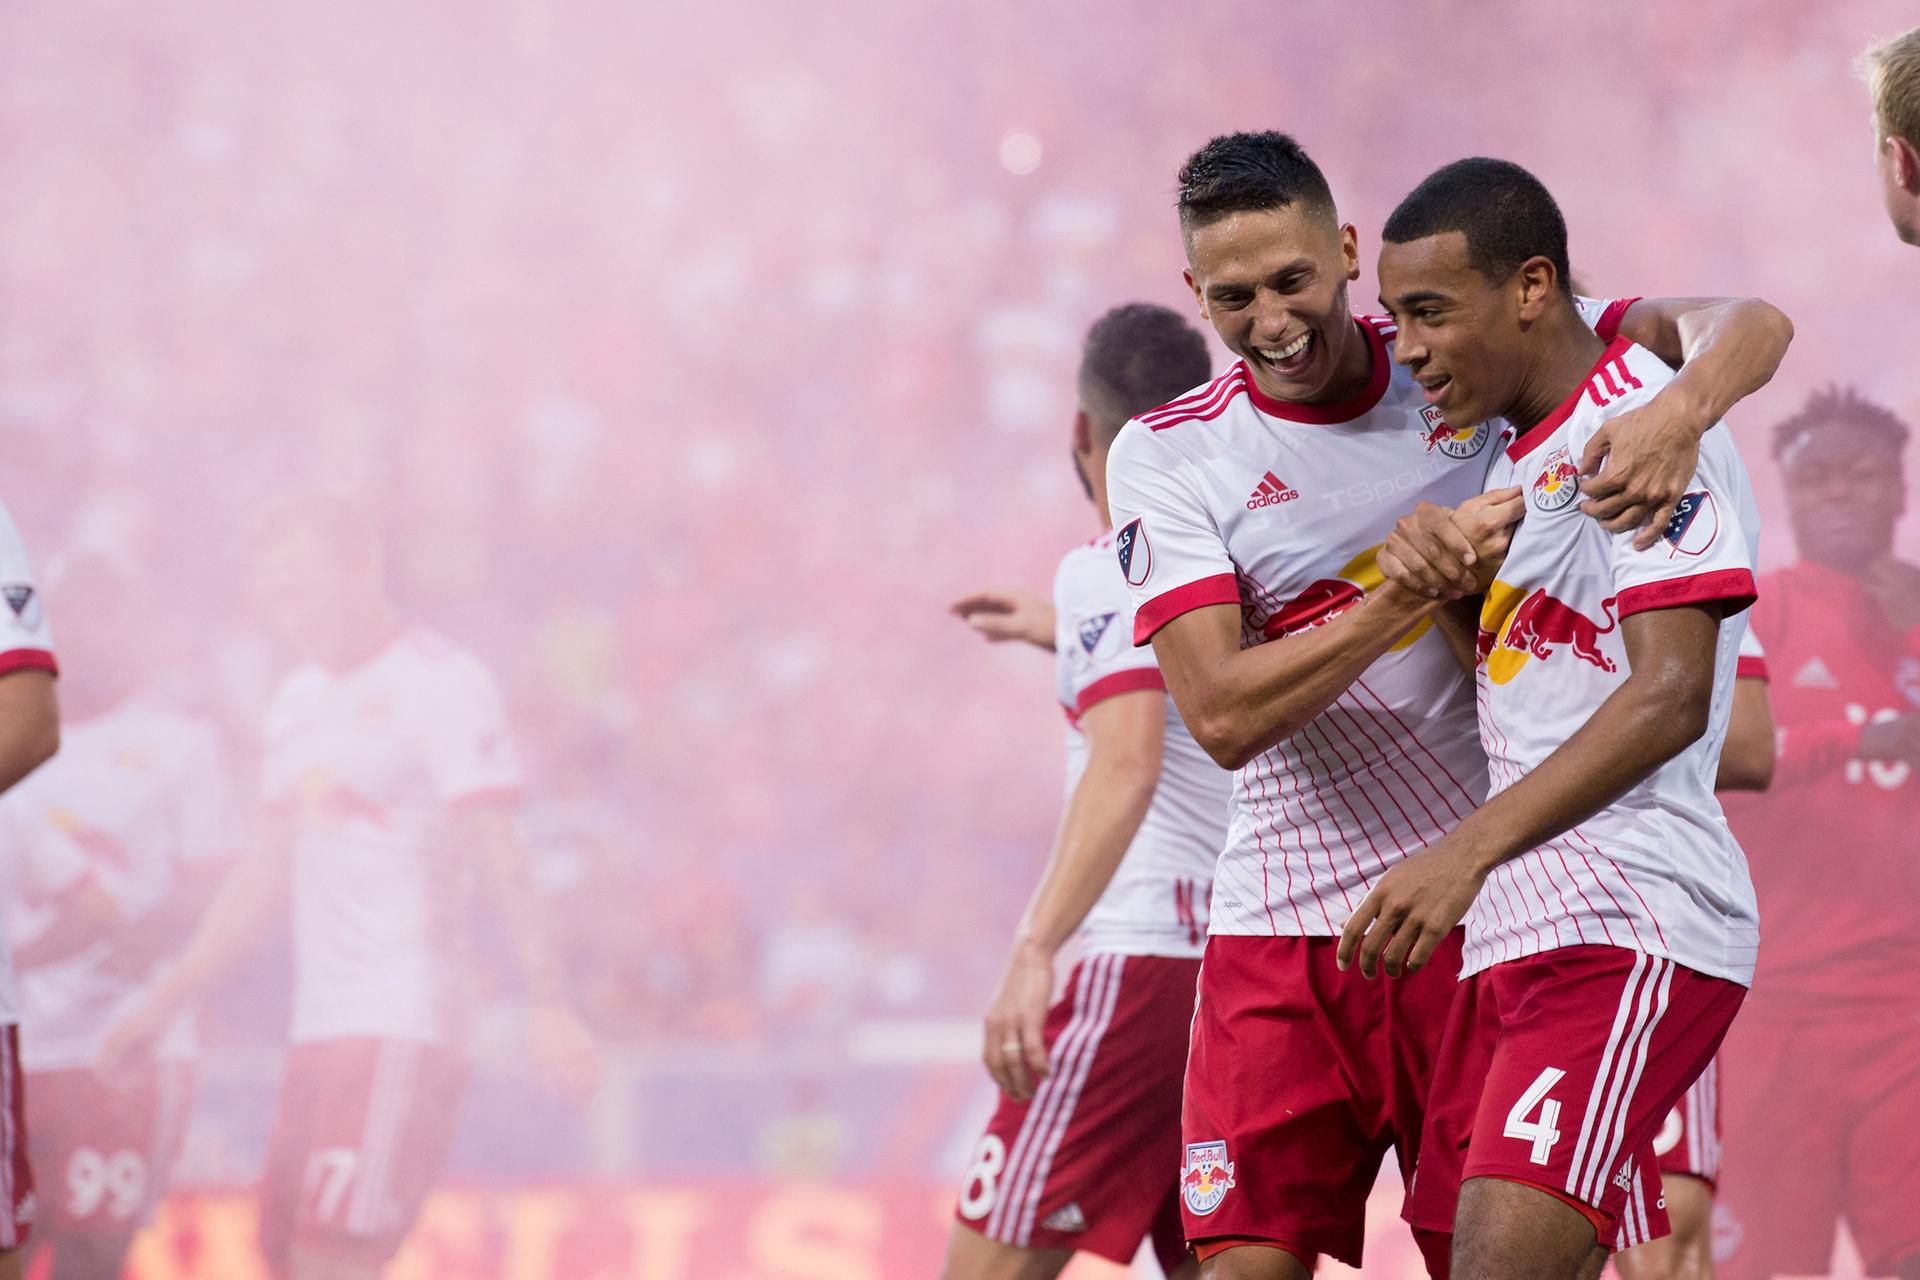 Two soccer players celebrate, New York Red Bulls